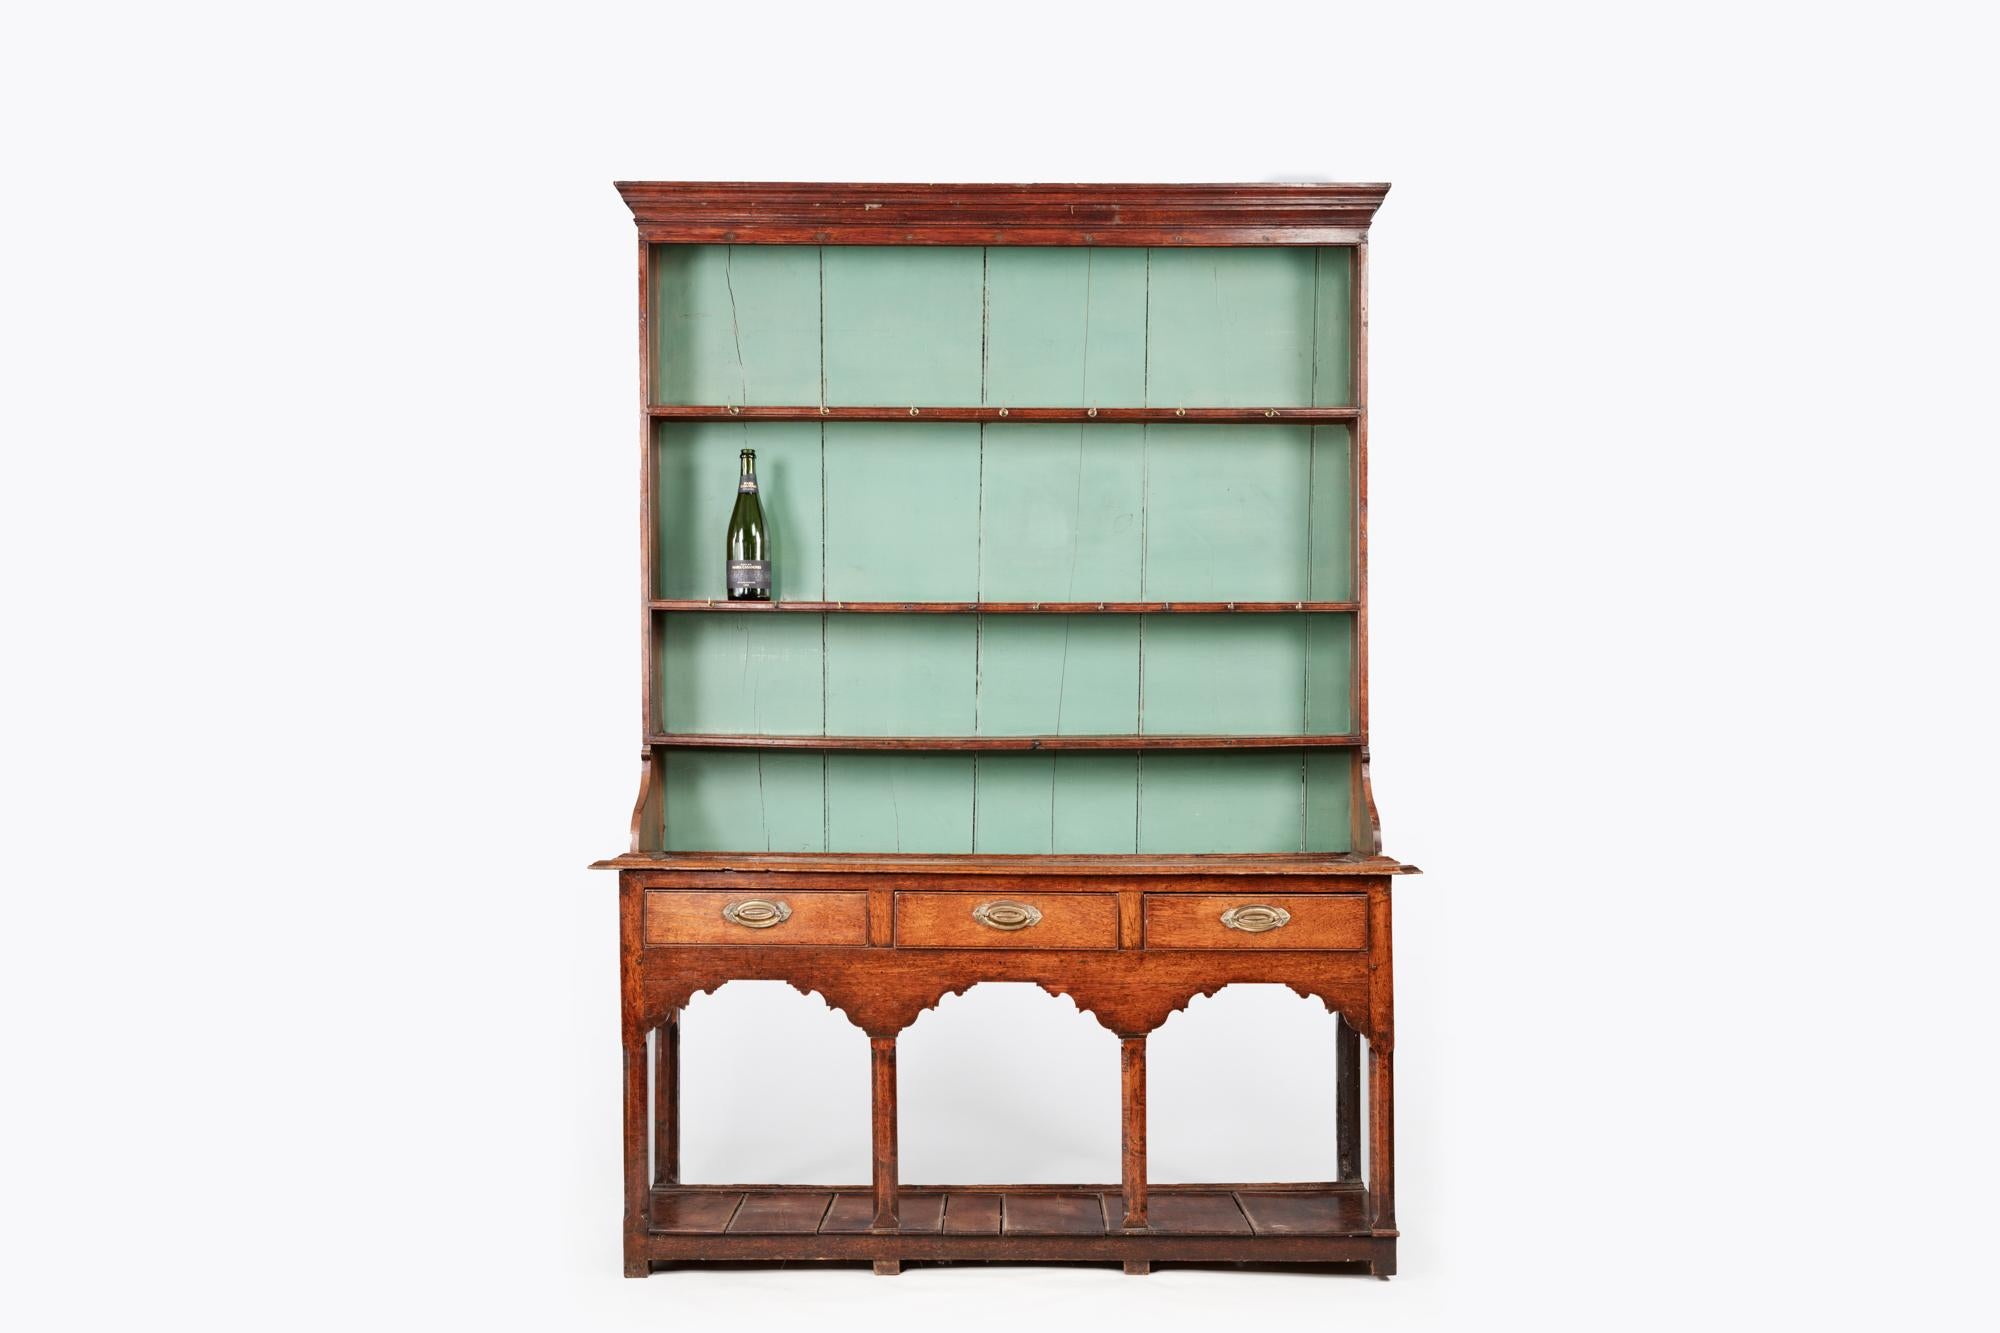 18th century Welsh potboard dresser of mixed oak, ash and painted pine with a pot board base. It features three central drawers with brass handles and a carved apron to the front sitting above three arches with chamfered supports. The upper section